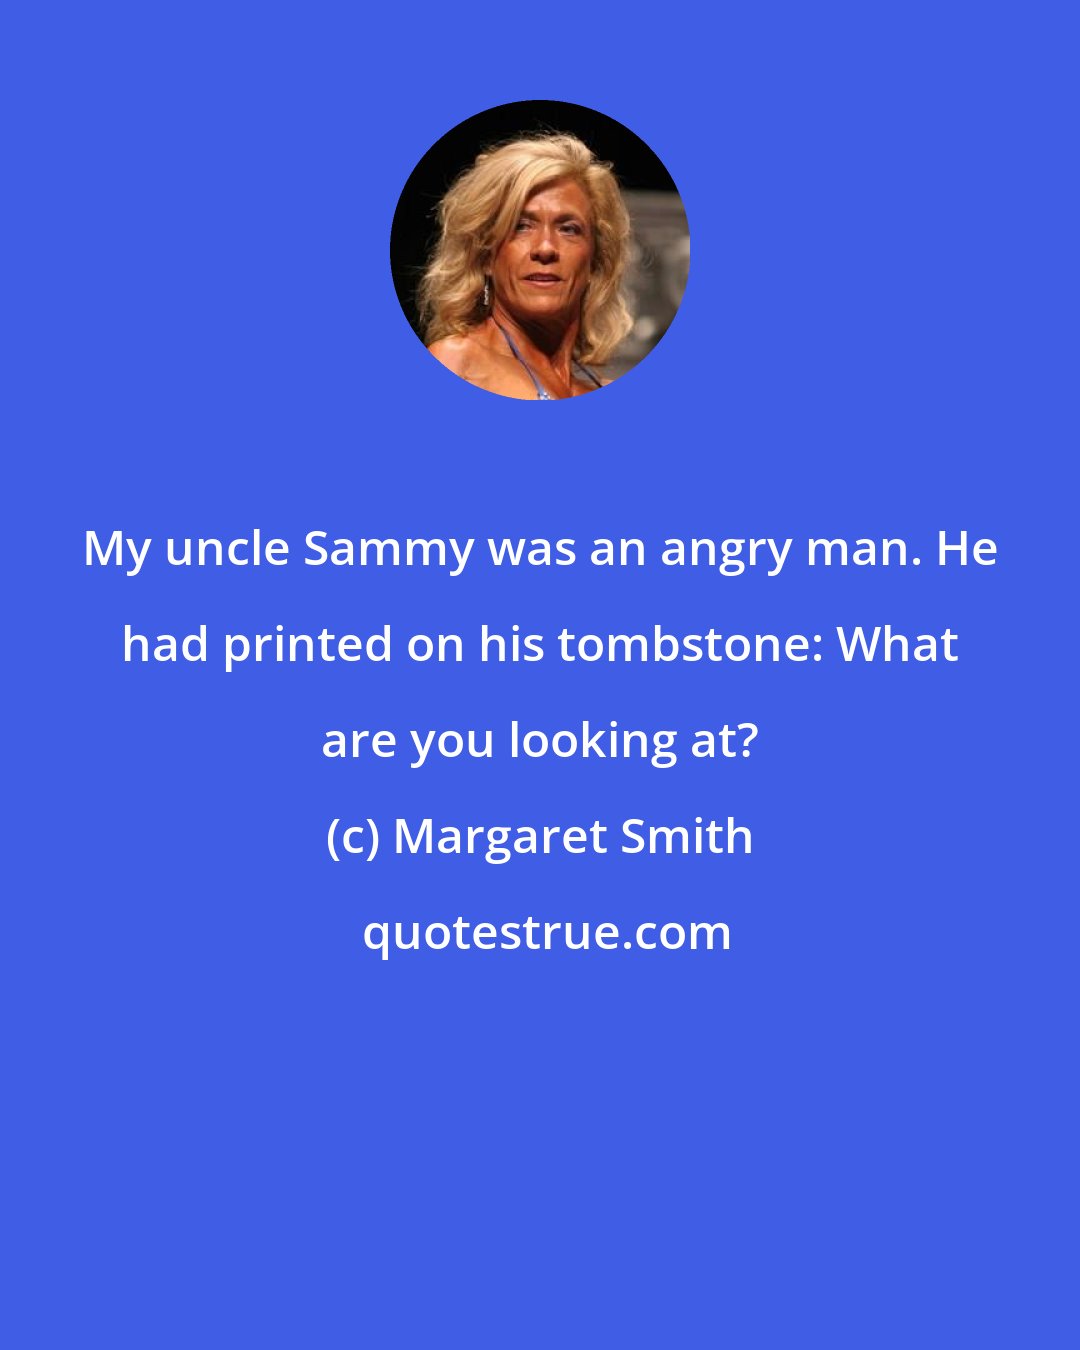 Margaret Smith: My uncle Sammy was an angry man. He had printed on his tombstone: What are you looking at?